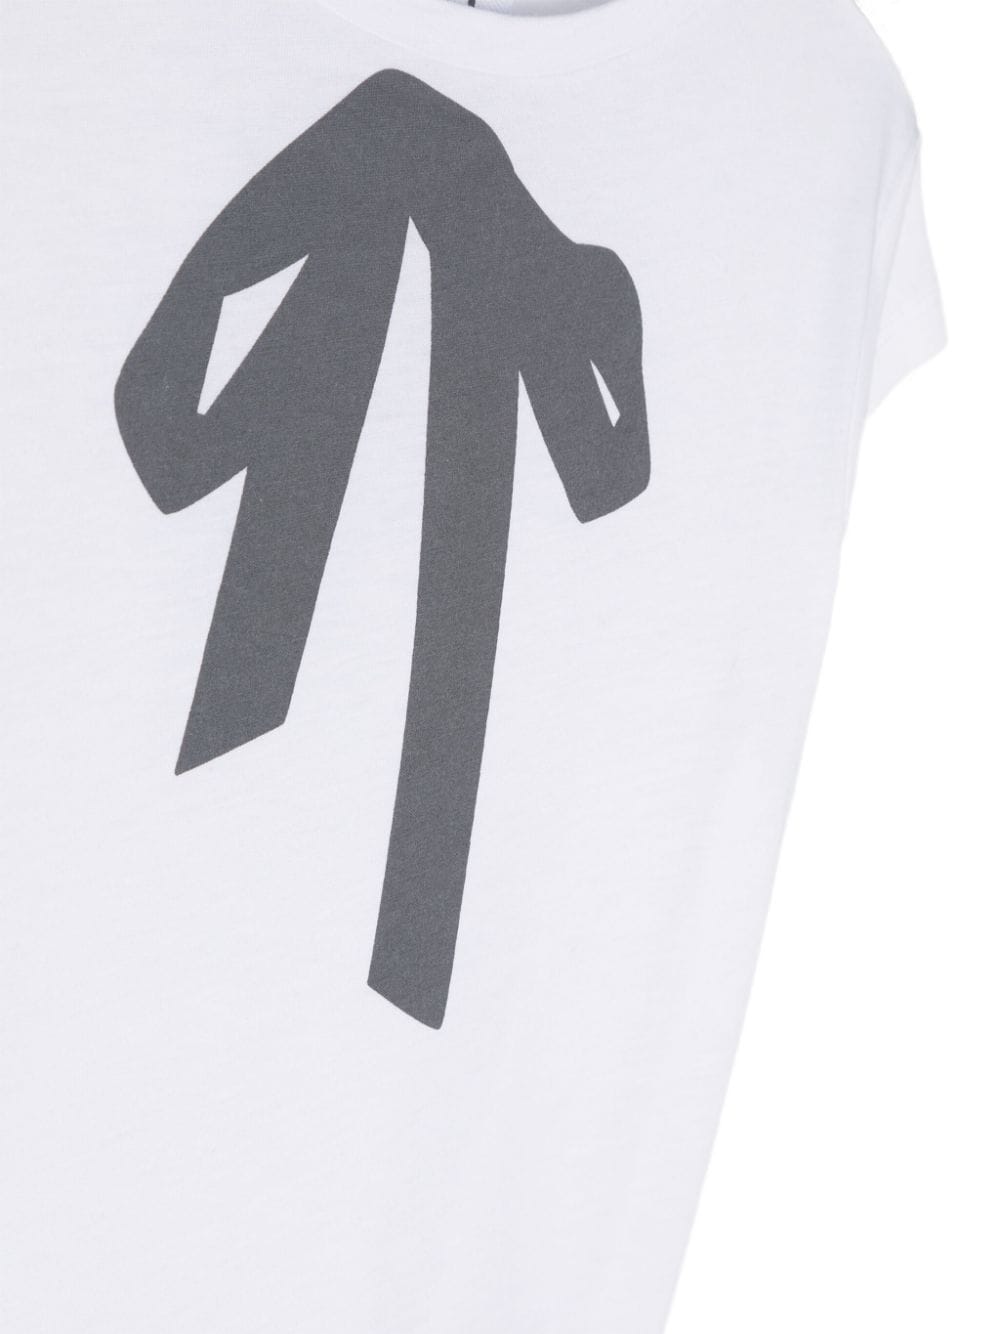 Shop Douuod T-shirt Con Stampa In White